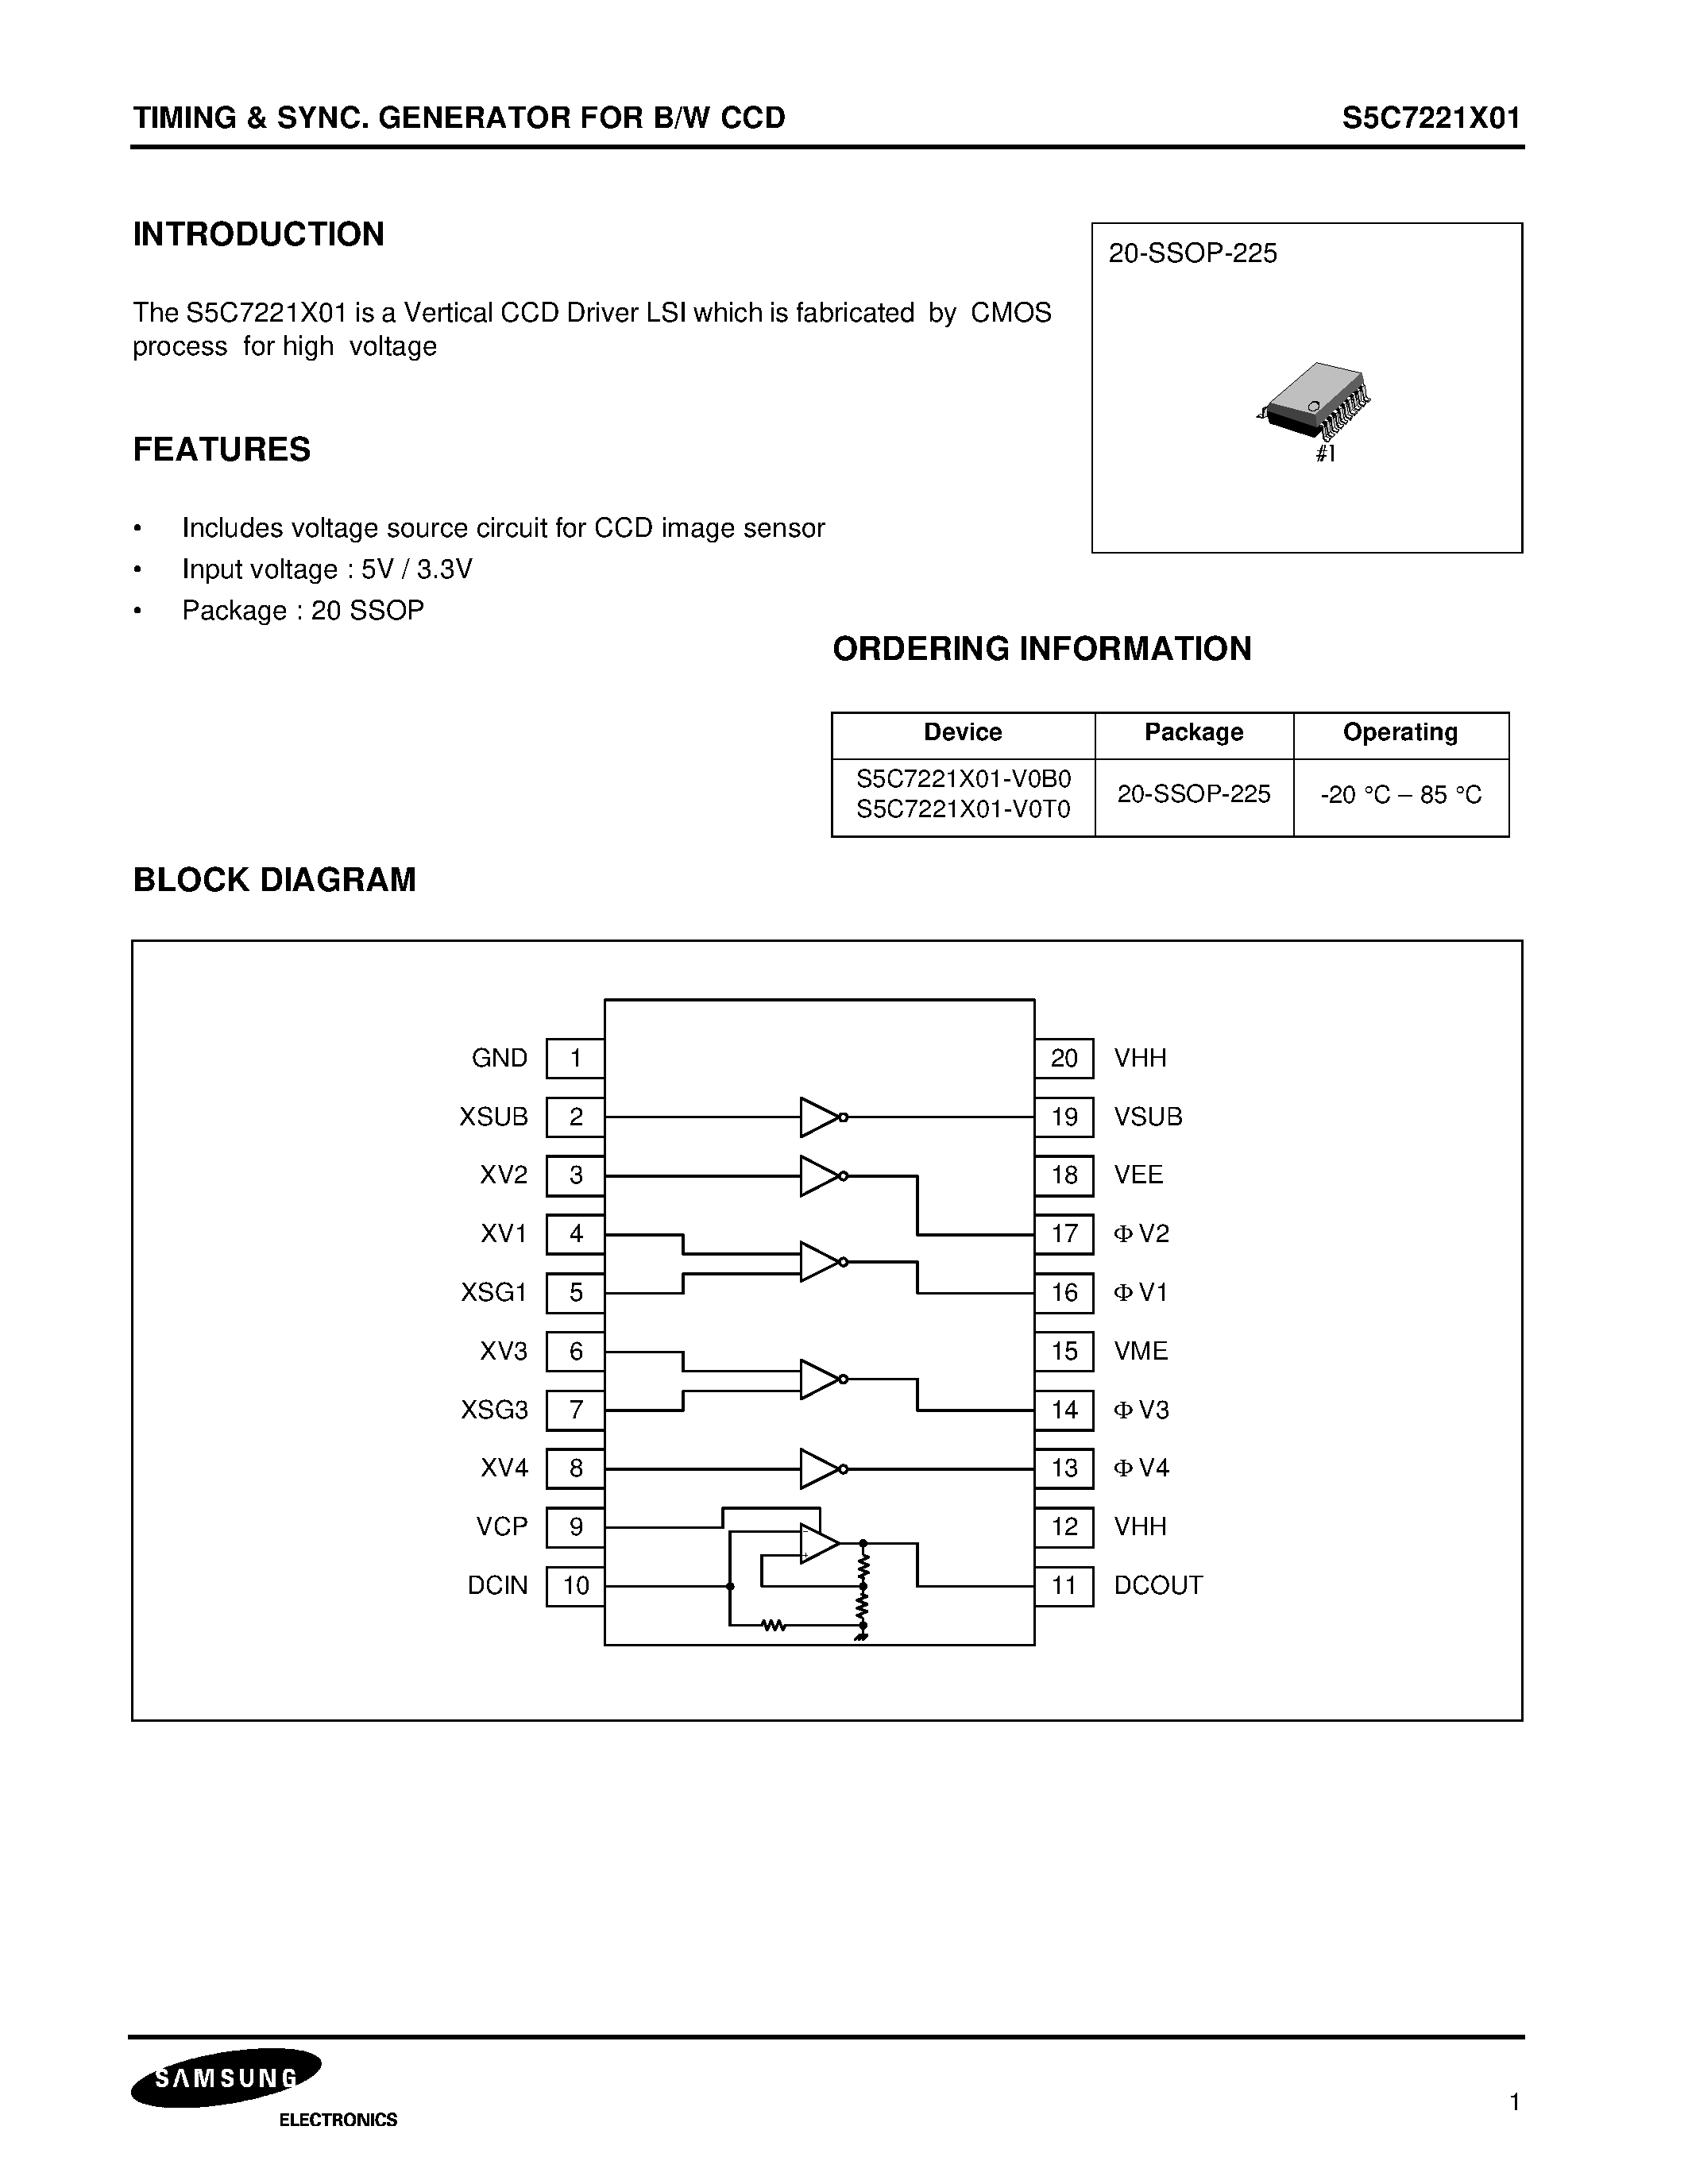 Datasheet S5C7221X - TIMING & SYNC. GENERATOR FOR B/W CCD page 1